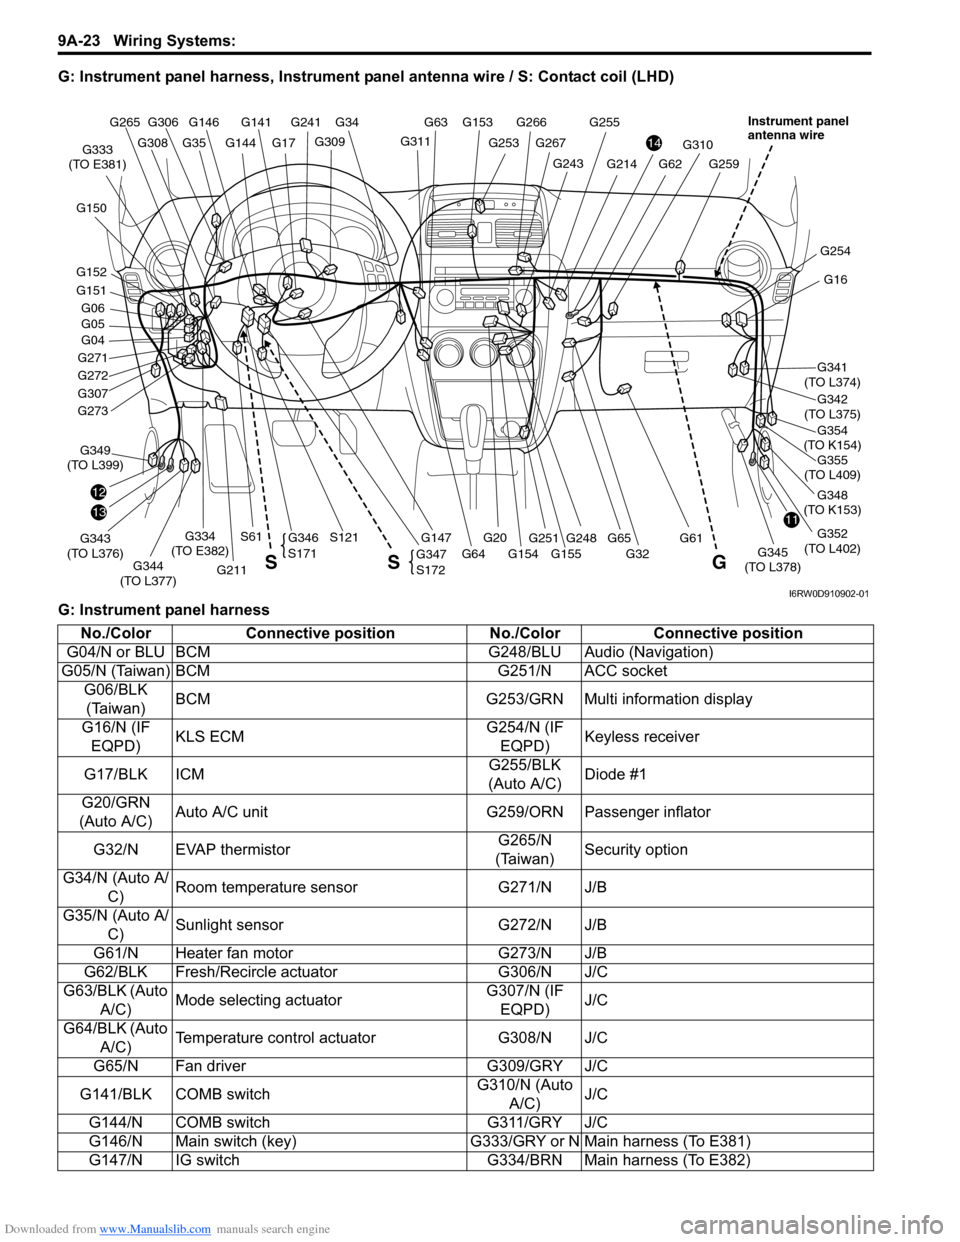 SUZUKI SX4 2006 1.G Service Workshop Manual Downloaded from www.Manualslib.com manuals search engine 9A-23 Wiring Systems: 
G: Instrument panel harness, Instrument panel antenna wire / S: Contact coil (LHD)
G: Instrument panel harness
G146G141
